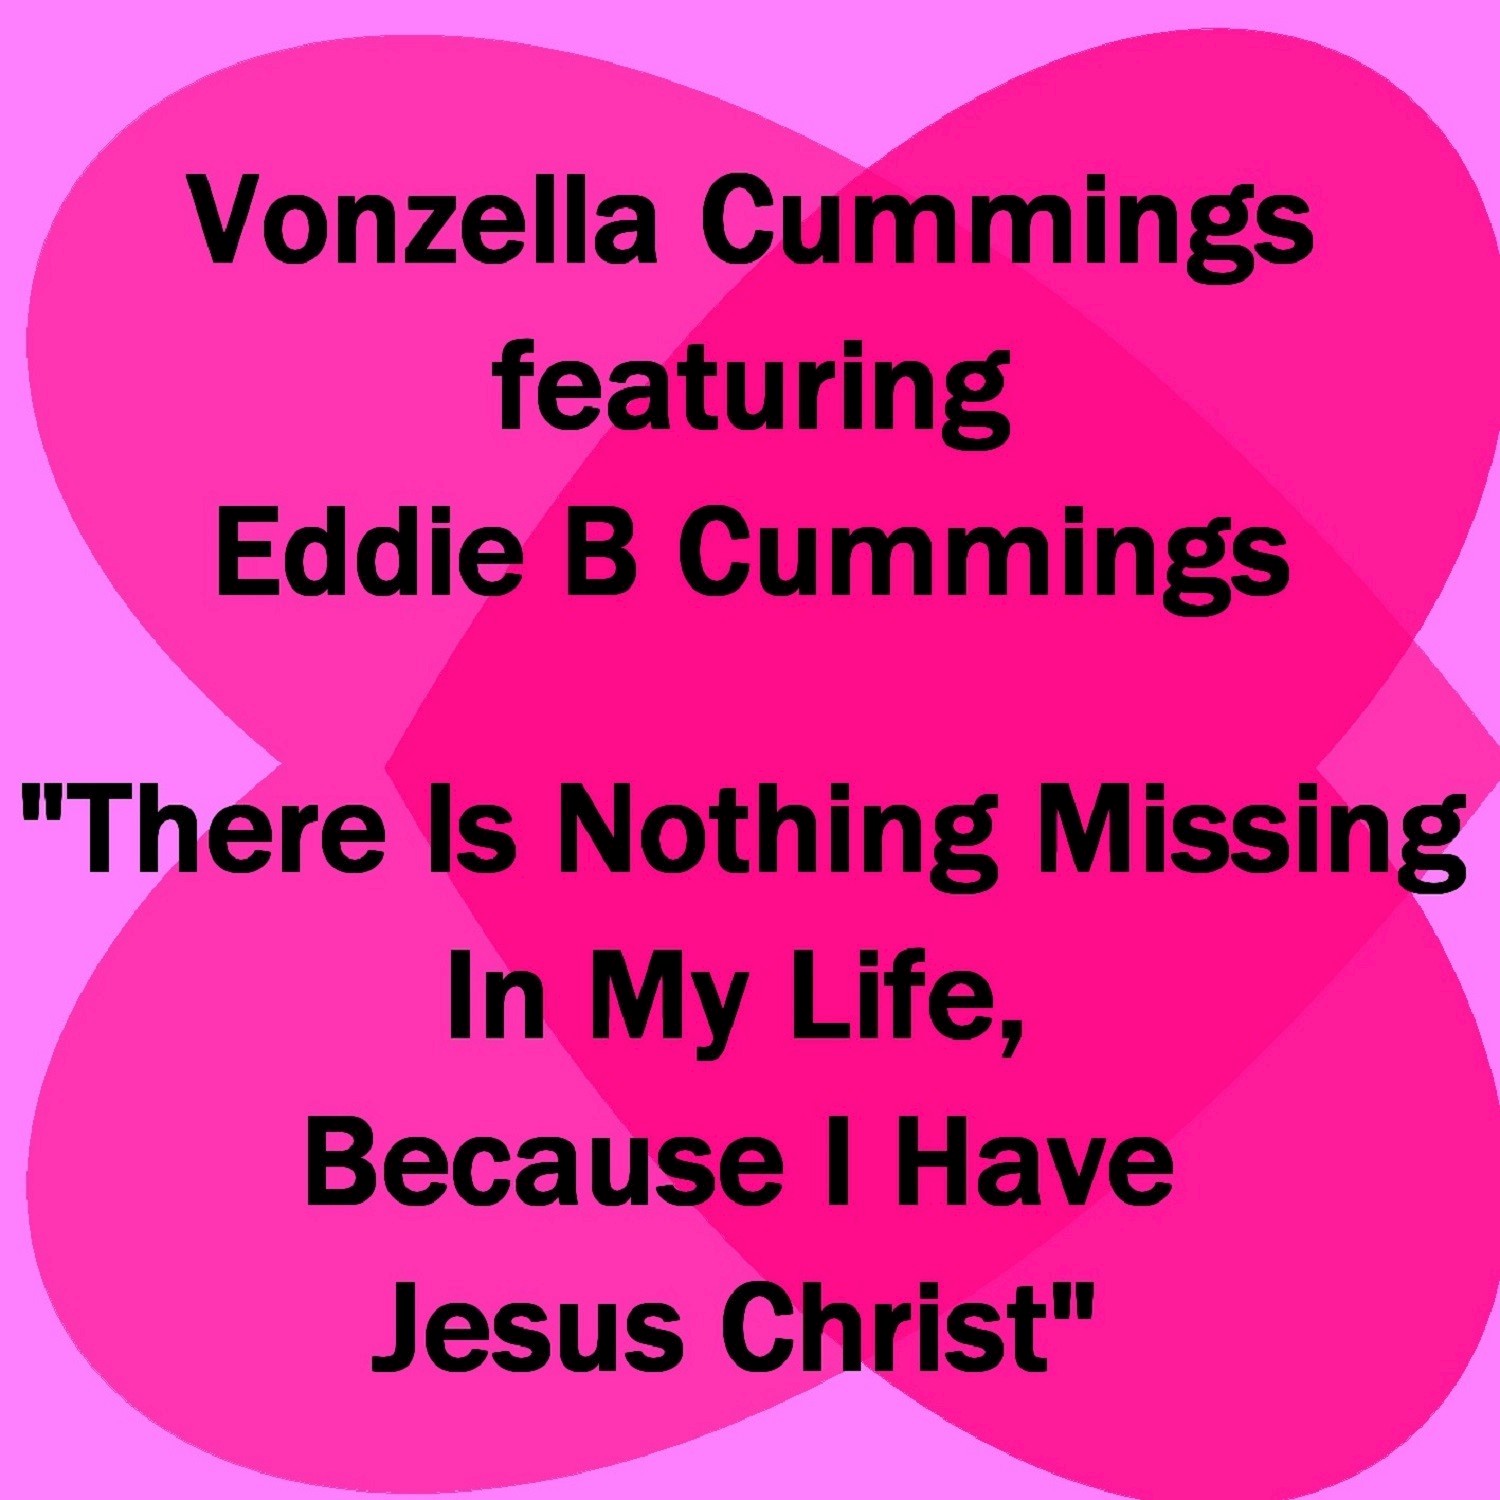 There Is Nothing Missing in My Life, Because I Have Jesus Christ